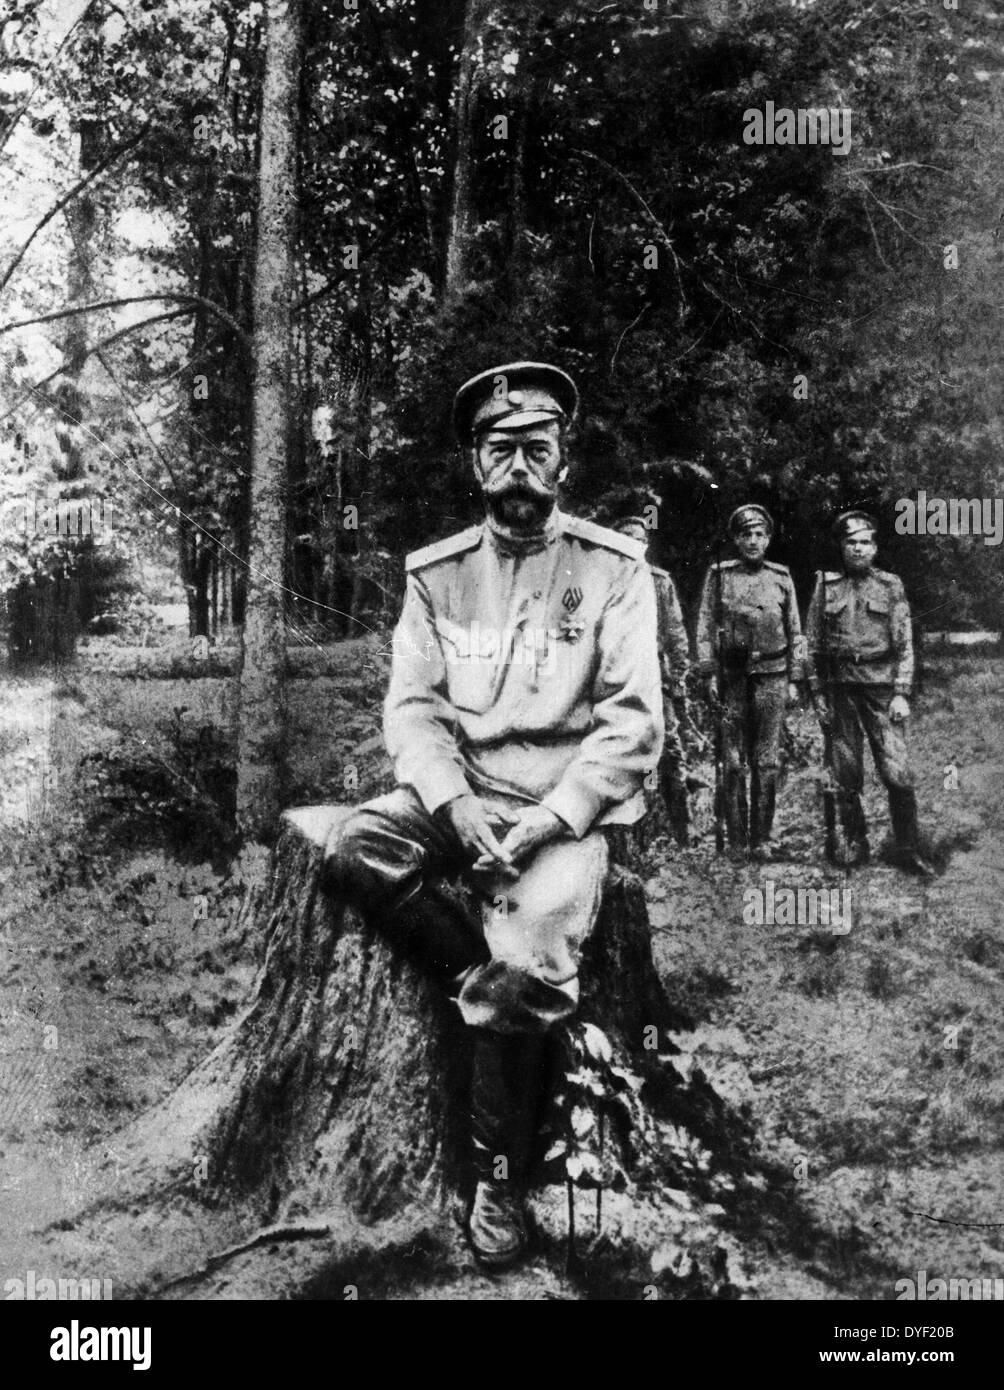 A photograph of Tsar Nicholas II, the last Emperor of Russia, Grand Duke of Finland, and King of Poland. Shown here sat outdoors on the stump of a felled tree. Stock Photo